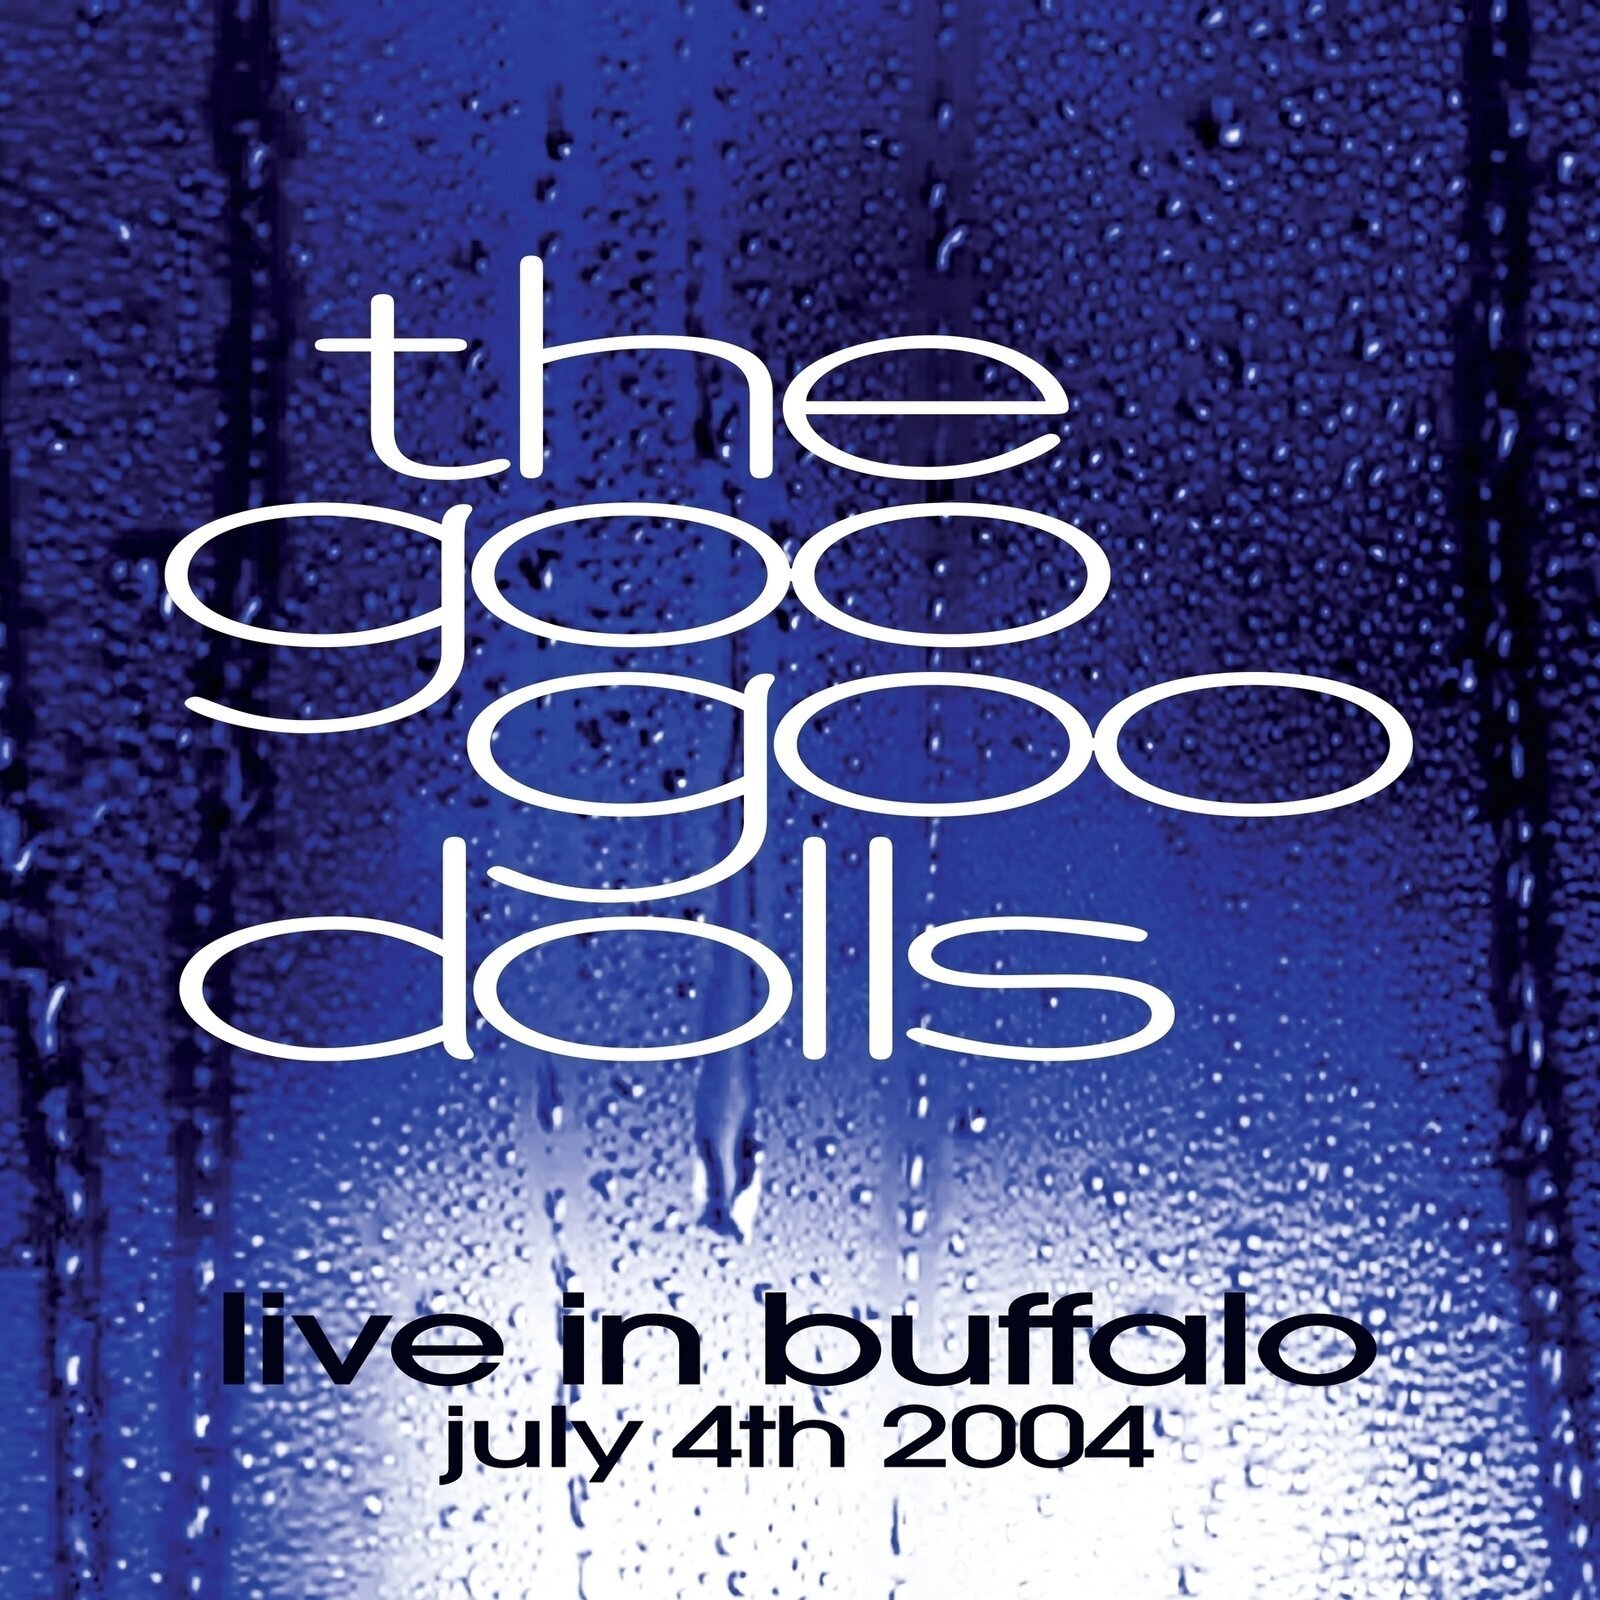 LP Goo Goo Dolls - Live In Buffalo July 4th 2004 (Limited Edition) (Clear Coloured) (2 LP)